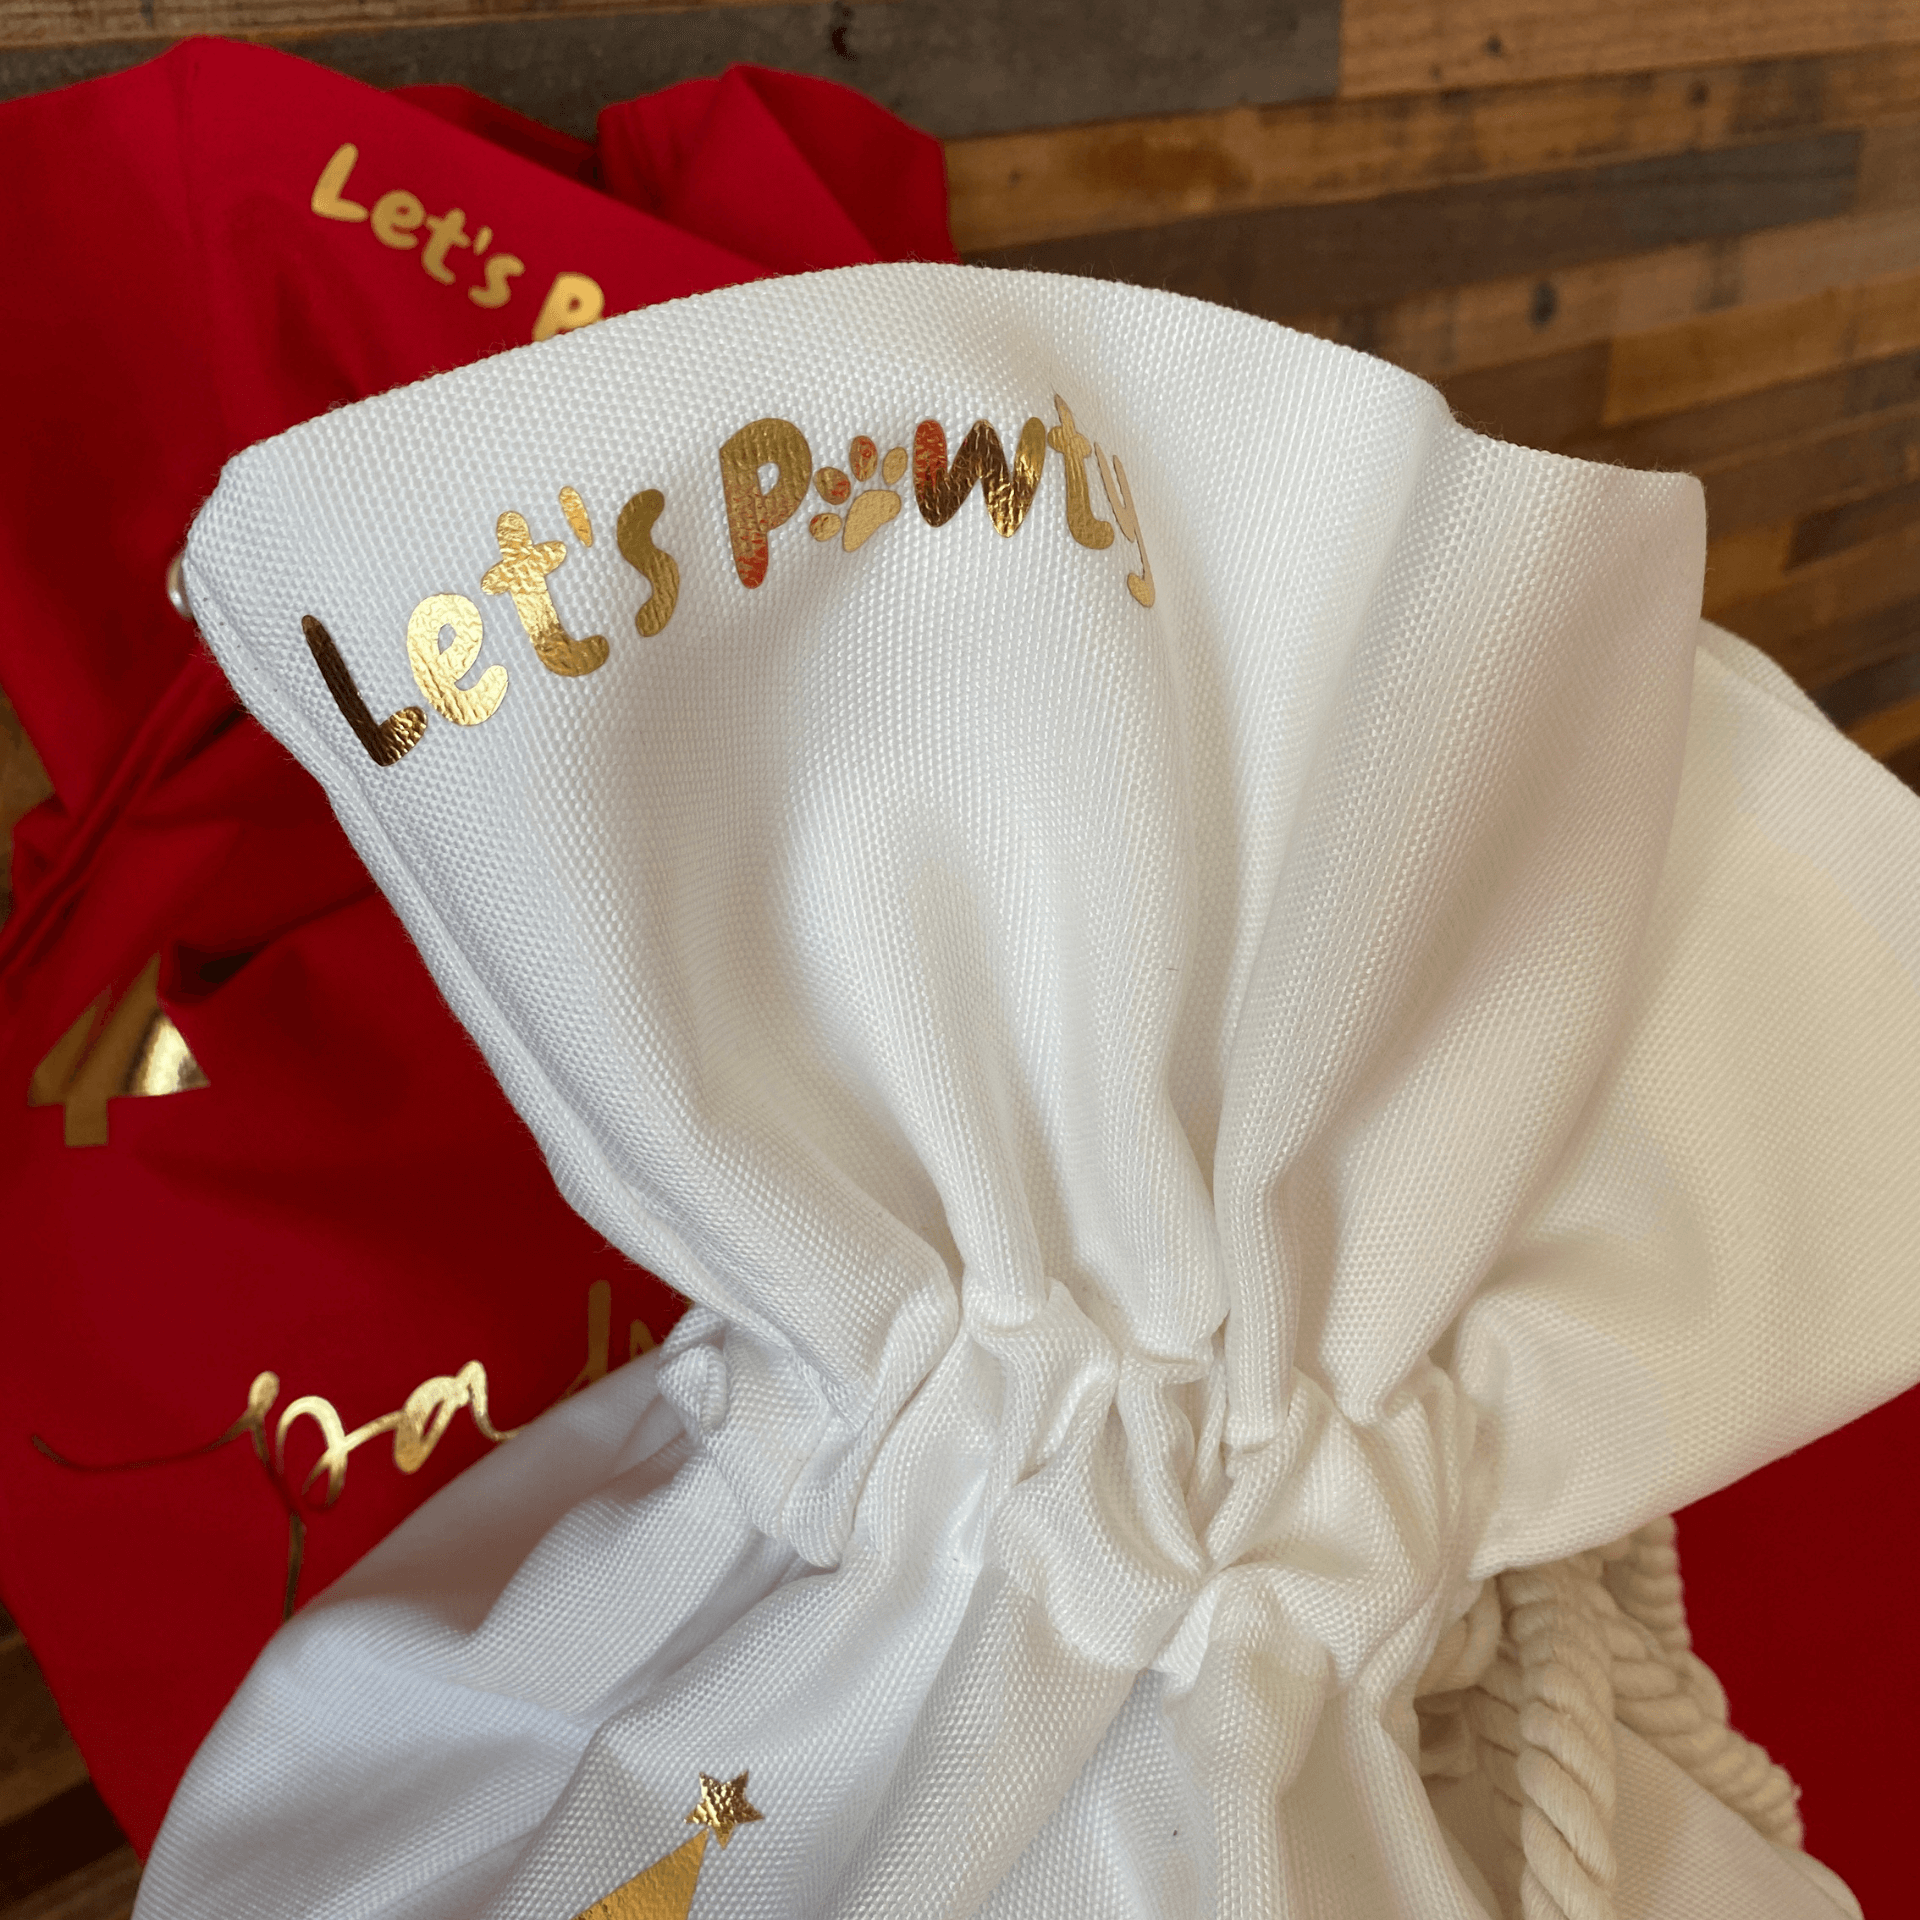 Let's Pawty personalised Santa sack for your furbaby to fill with dog toys, dog treat and accessories